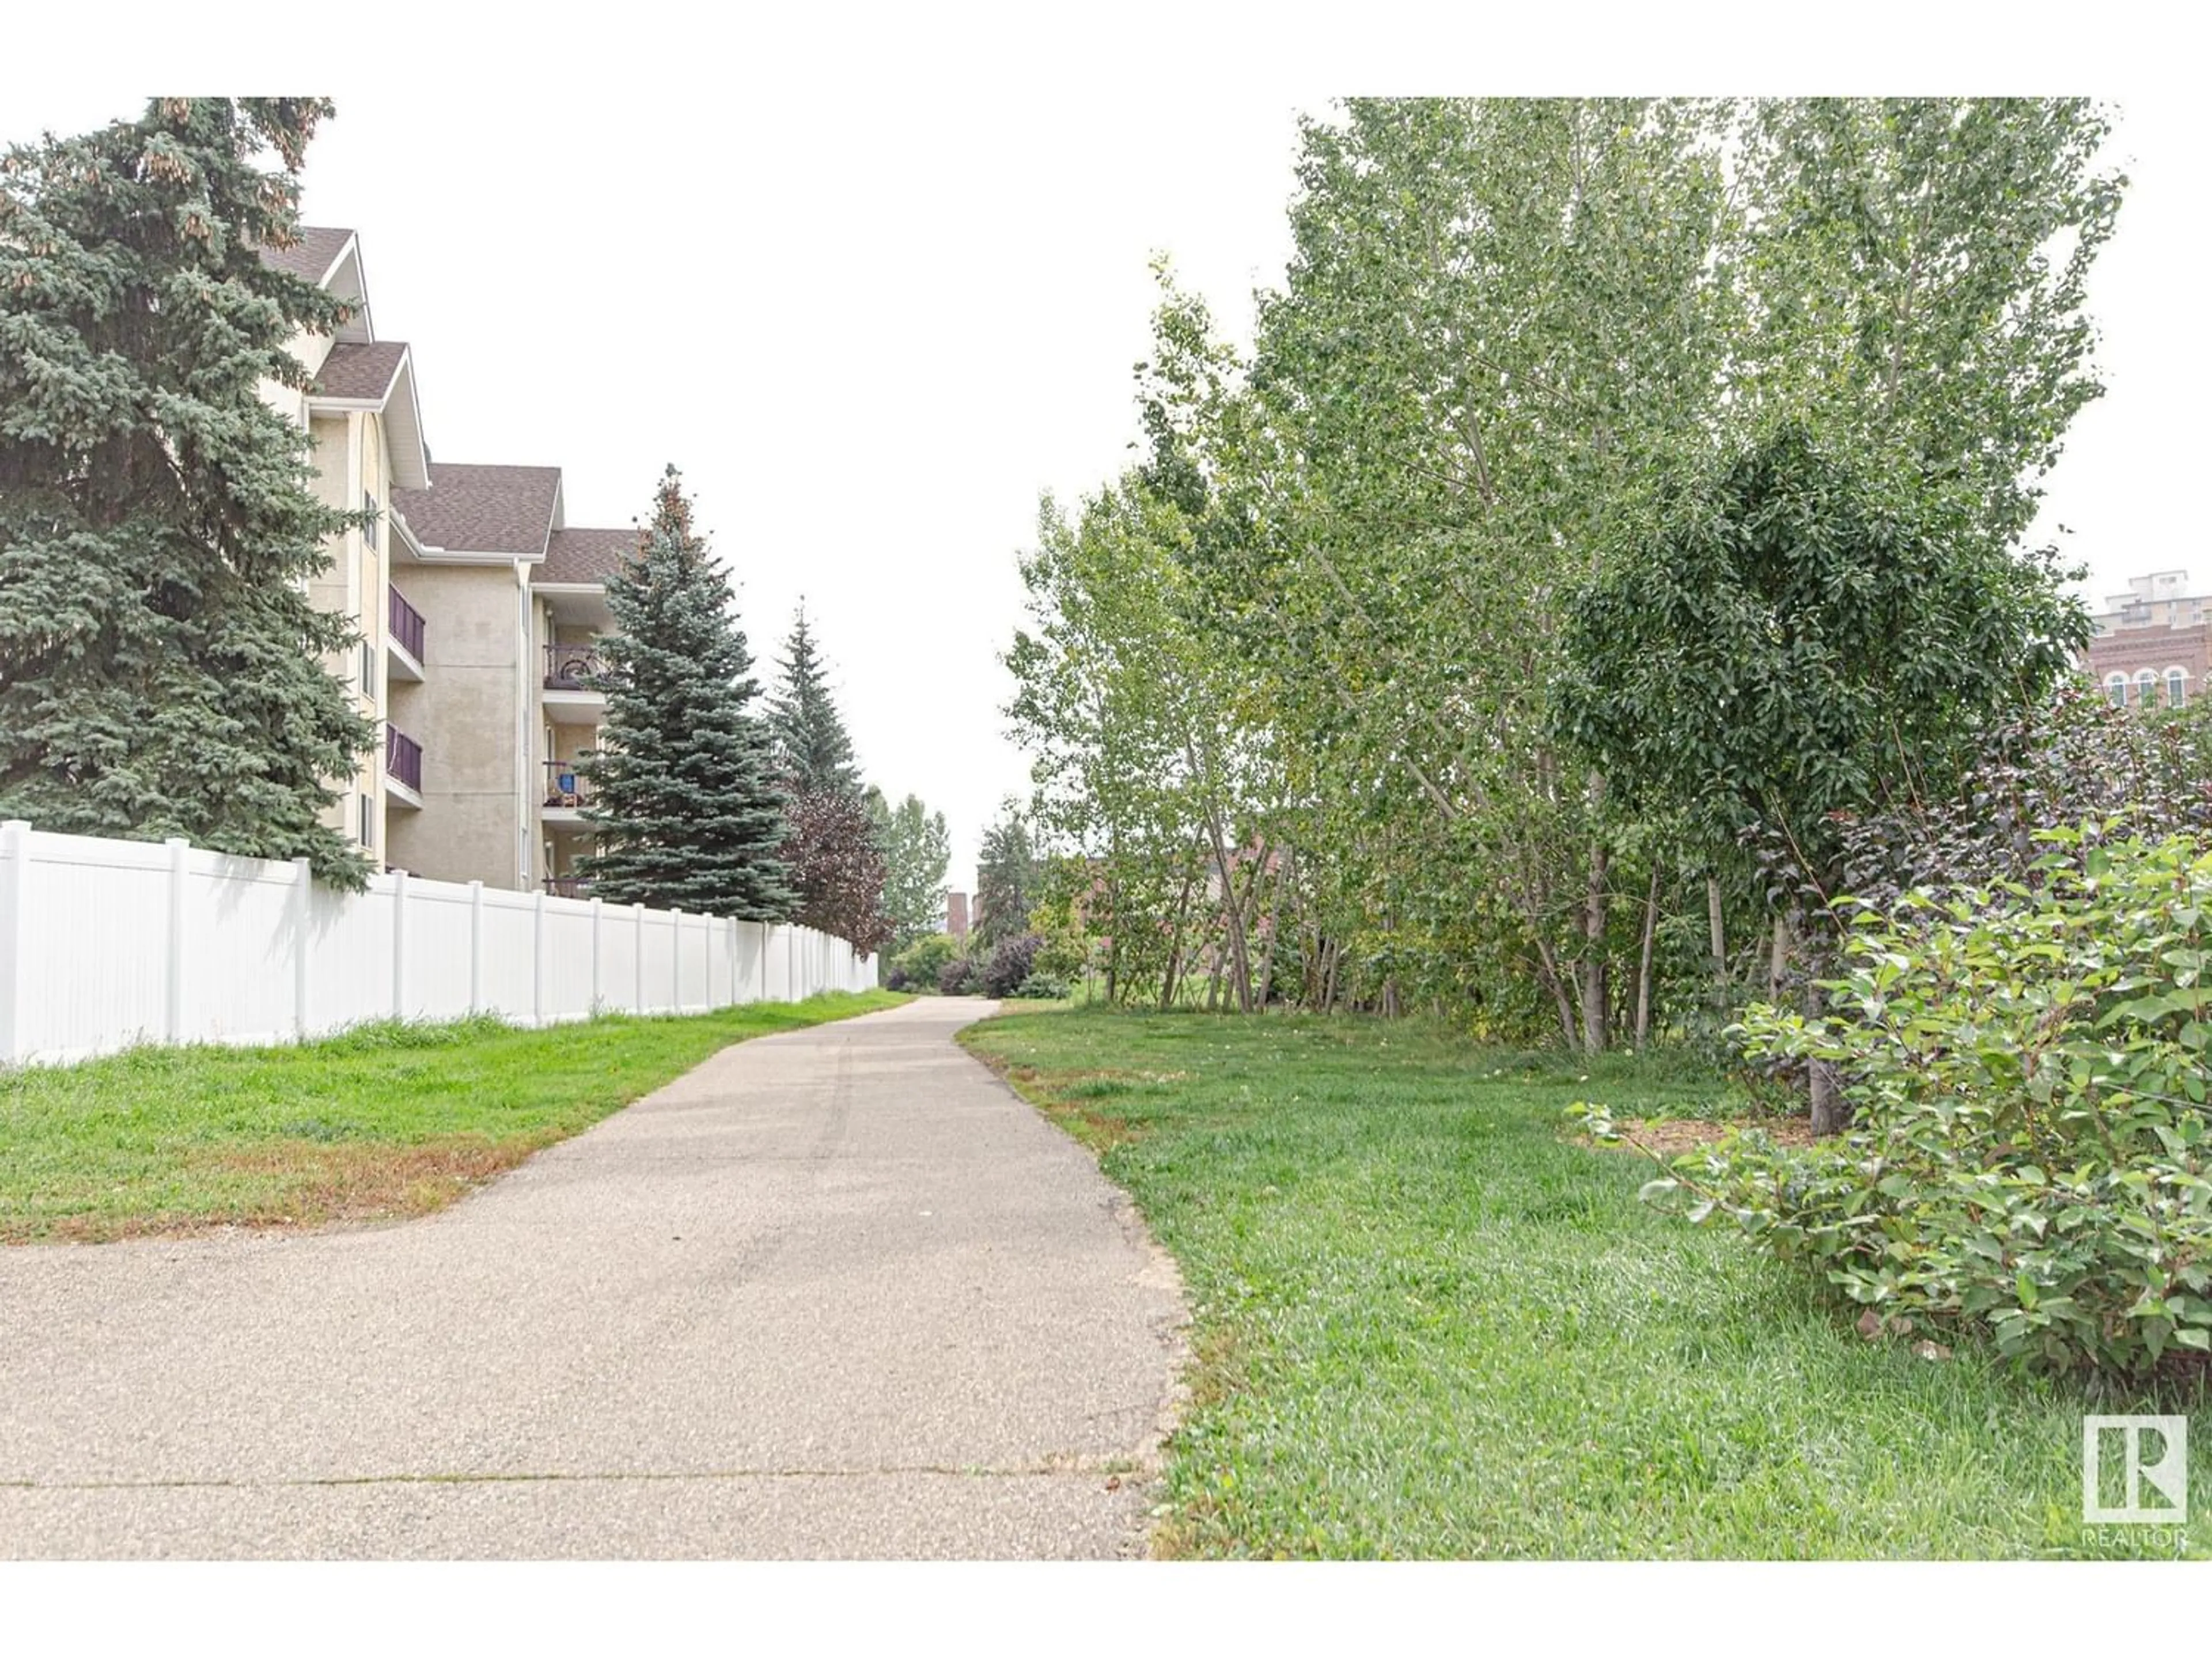 A pic from exterior of the house or condo for #372 10520 120 ST NW, Edmonton Alberta T5H4L9